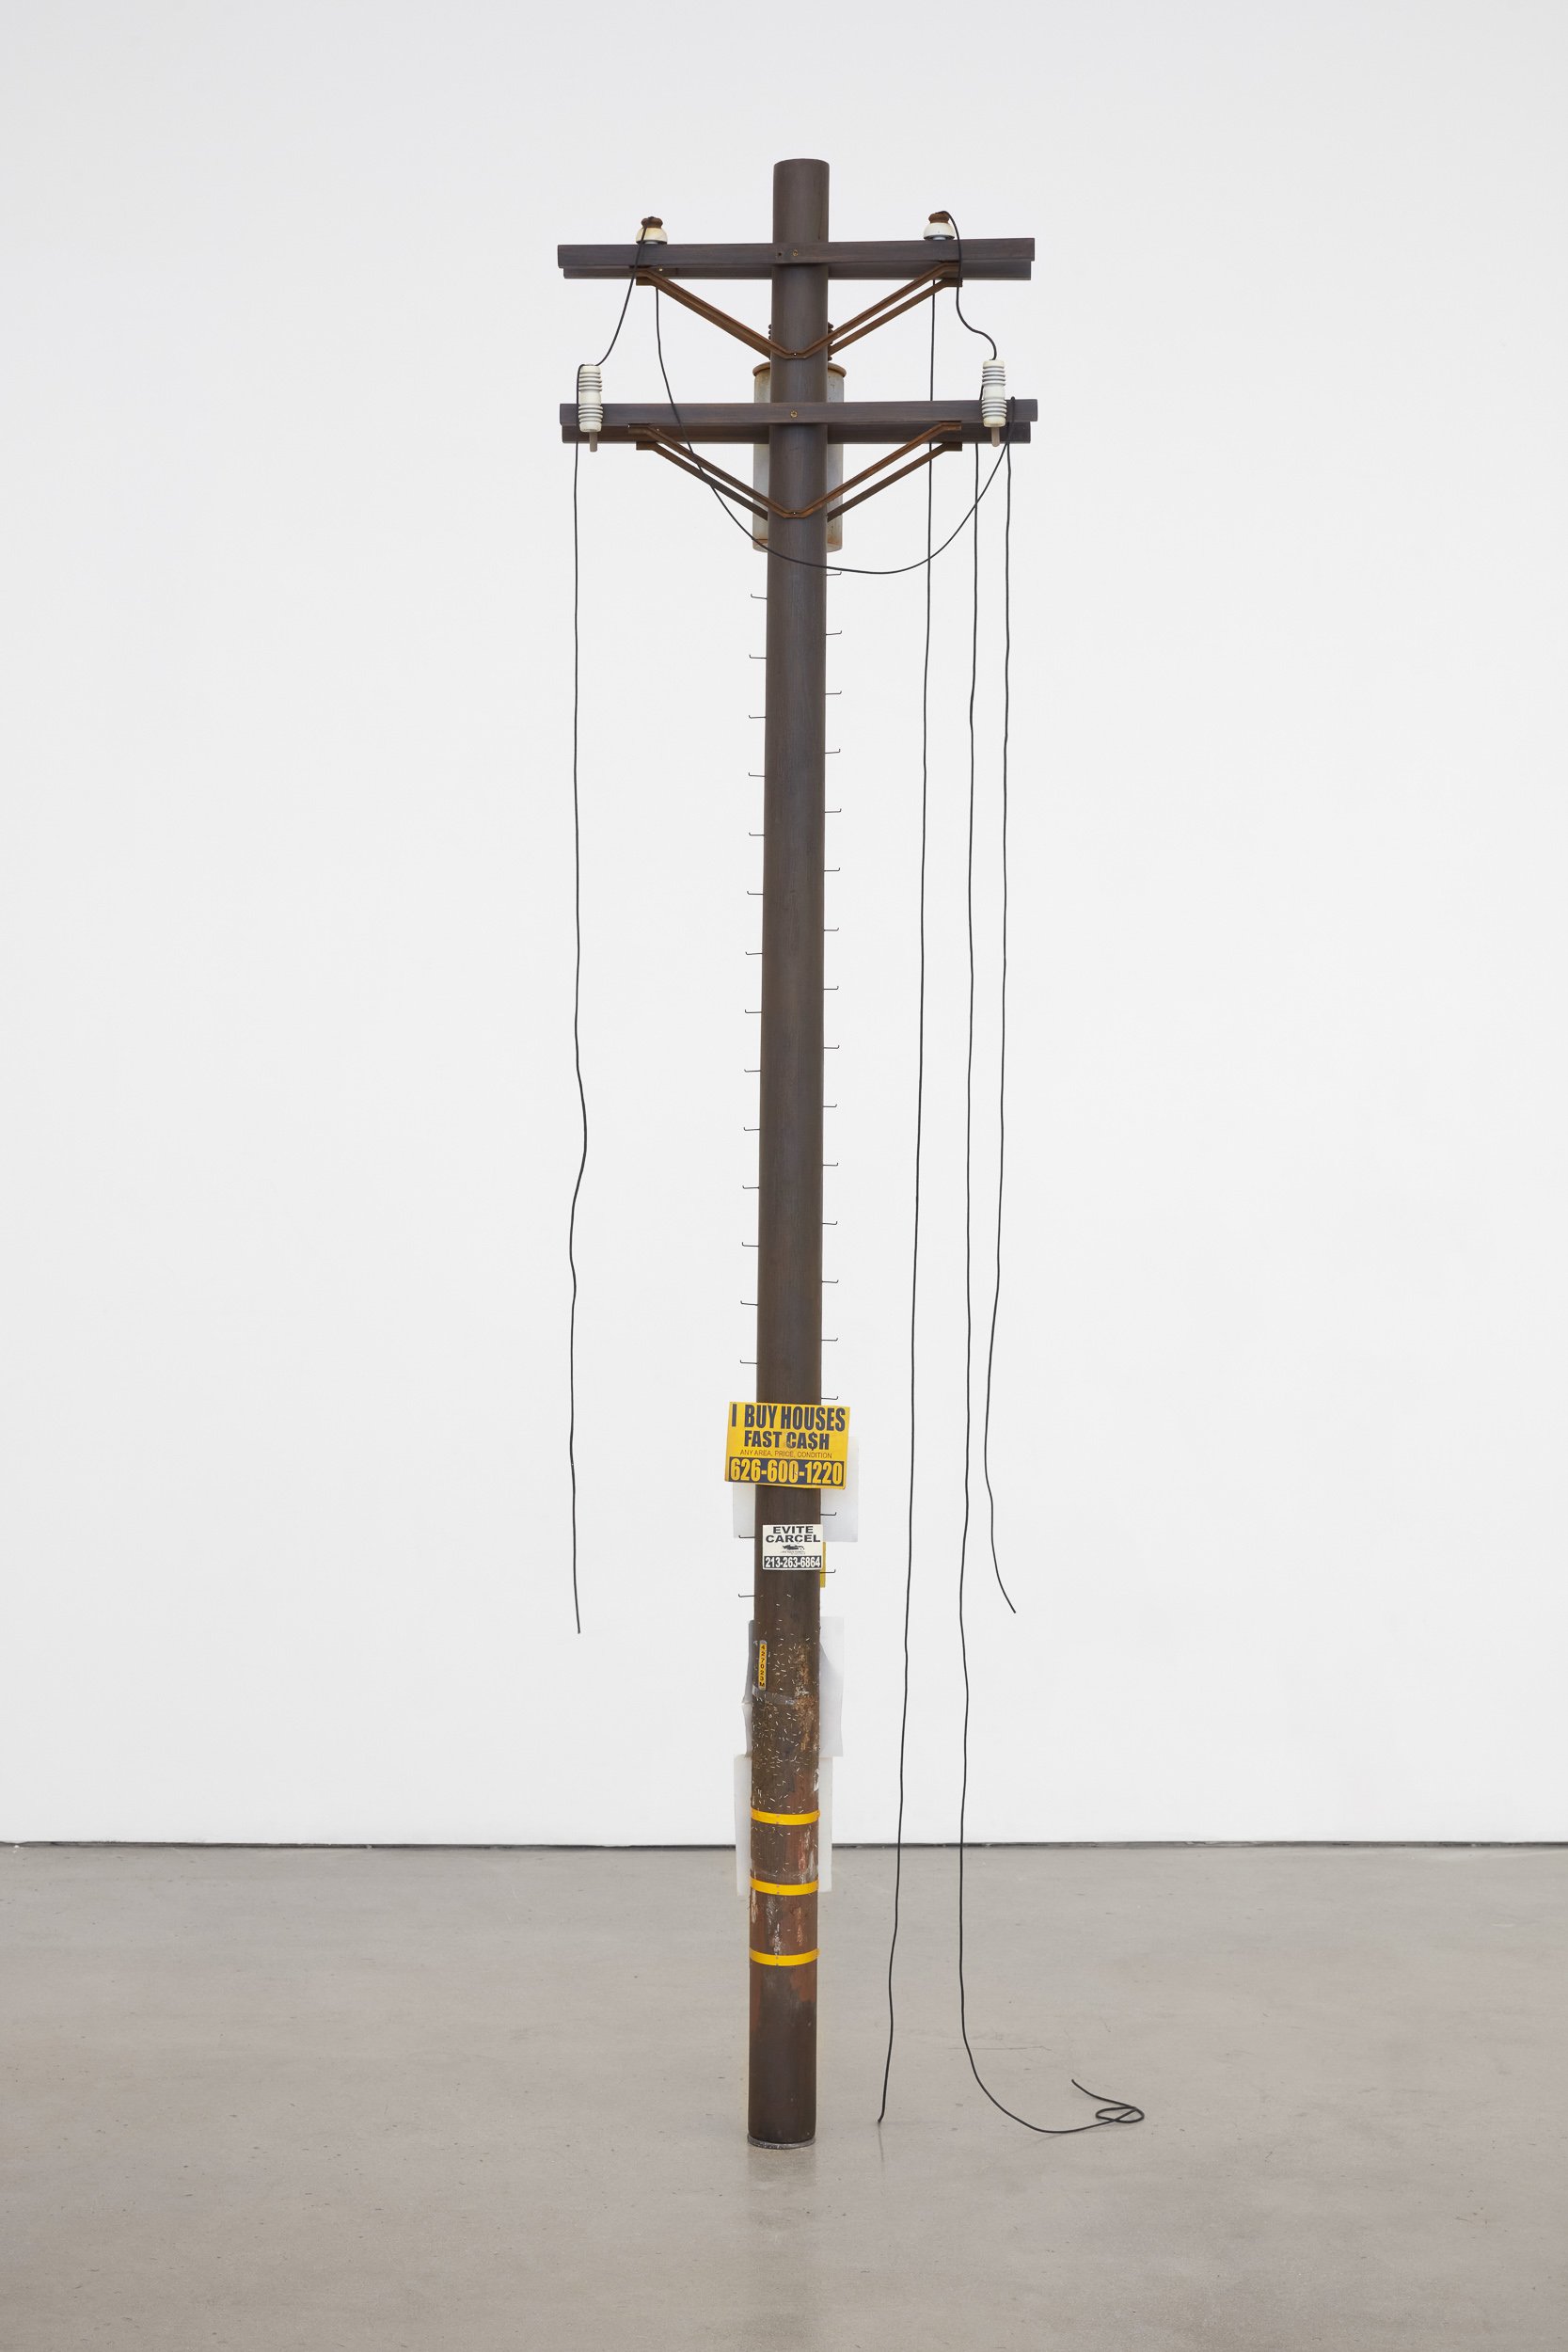   Totem,  2022. Bondo, acrylic and solvent based paints on wood, paper, steel, nylon shoelace, PVC, and vinyl. 96 x 23 x 10 inches 